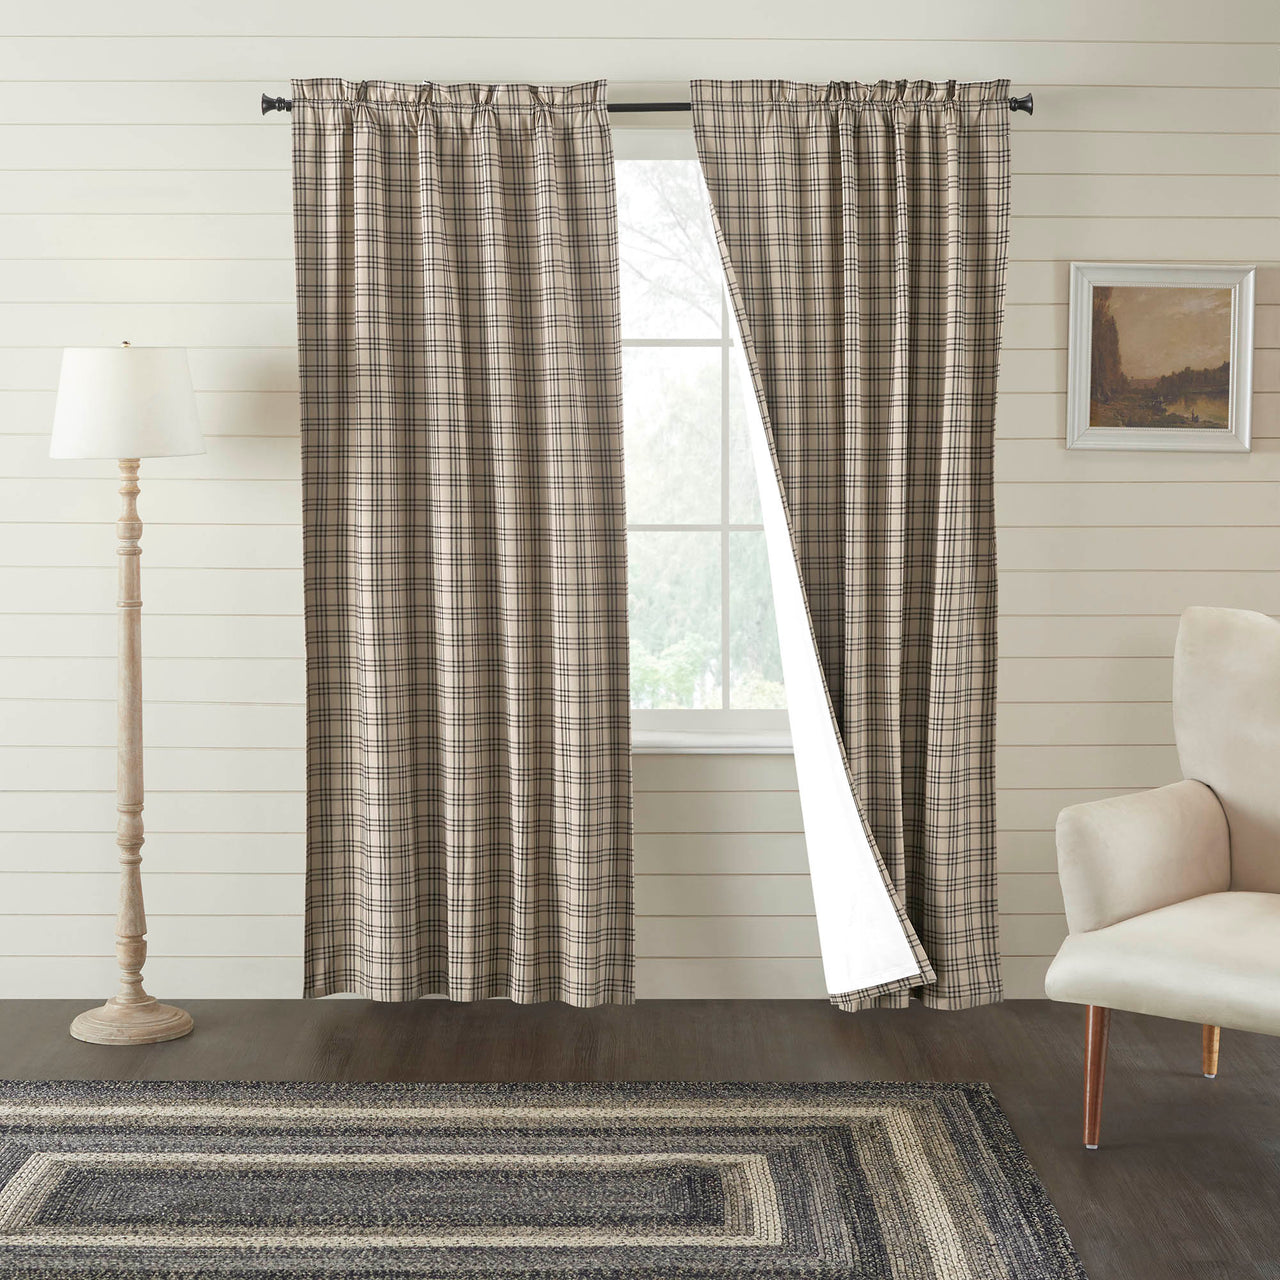 Sawyer Mill Charcoal Plaid Blackout Panel Curtain 84x40 VHC Brands